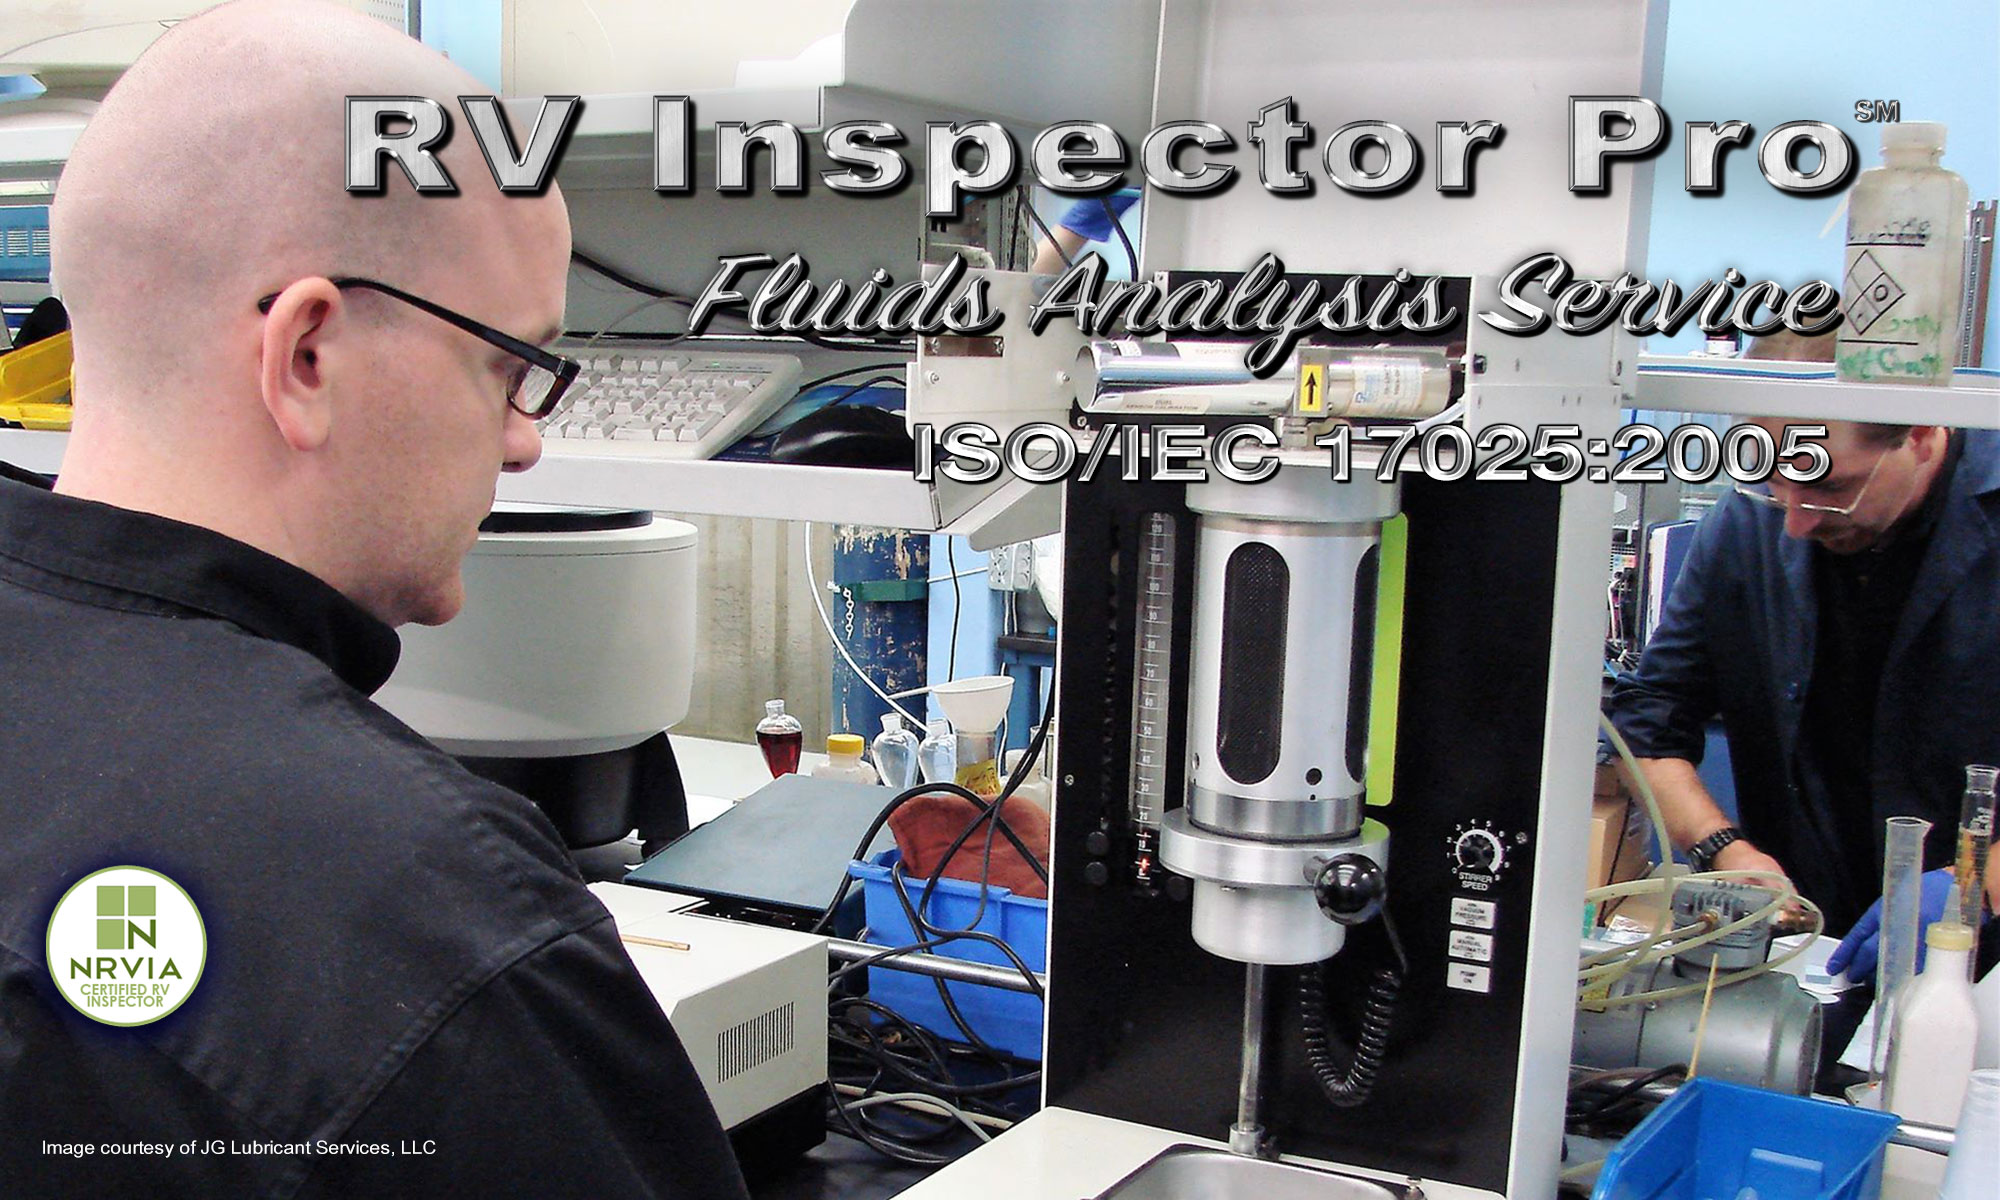 Ask the RV Inspector Pro for a complete Fluid Analysis Service.